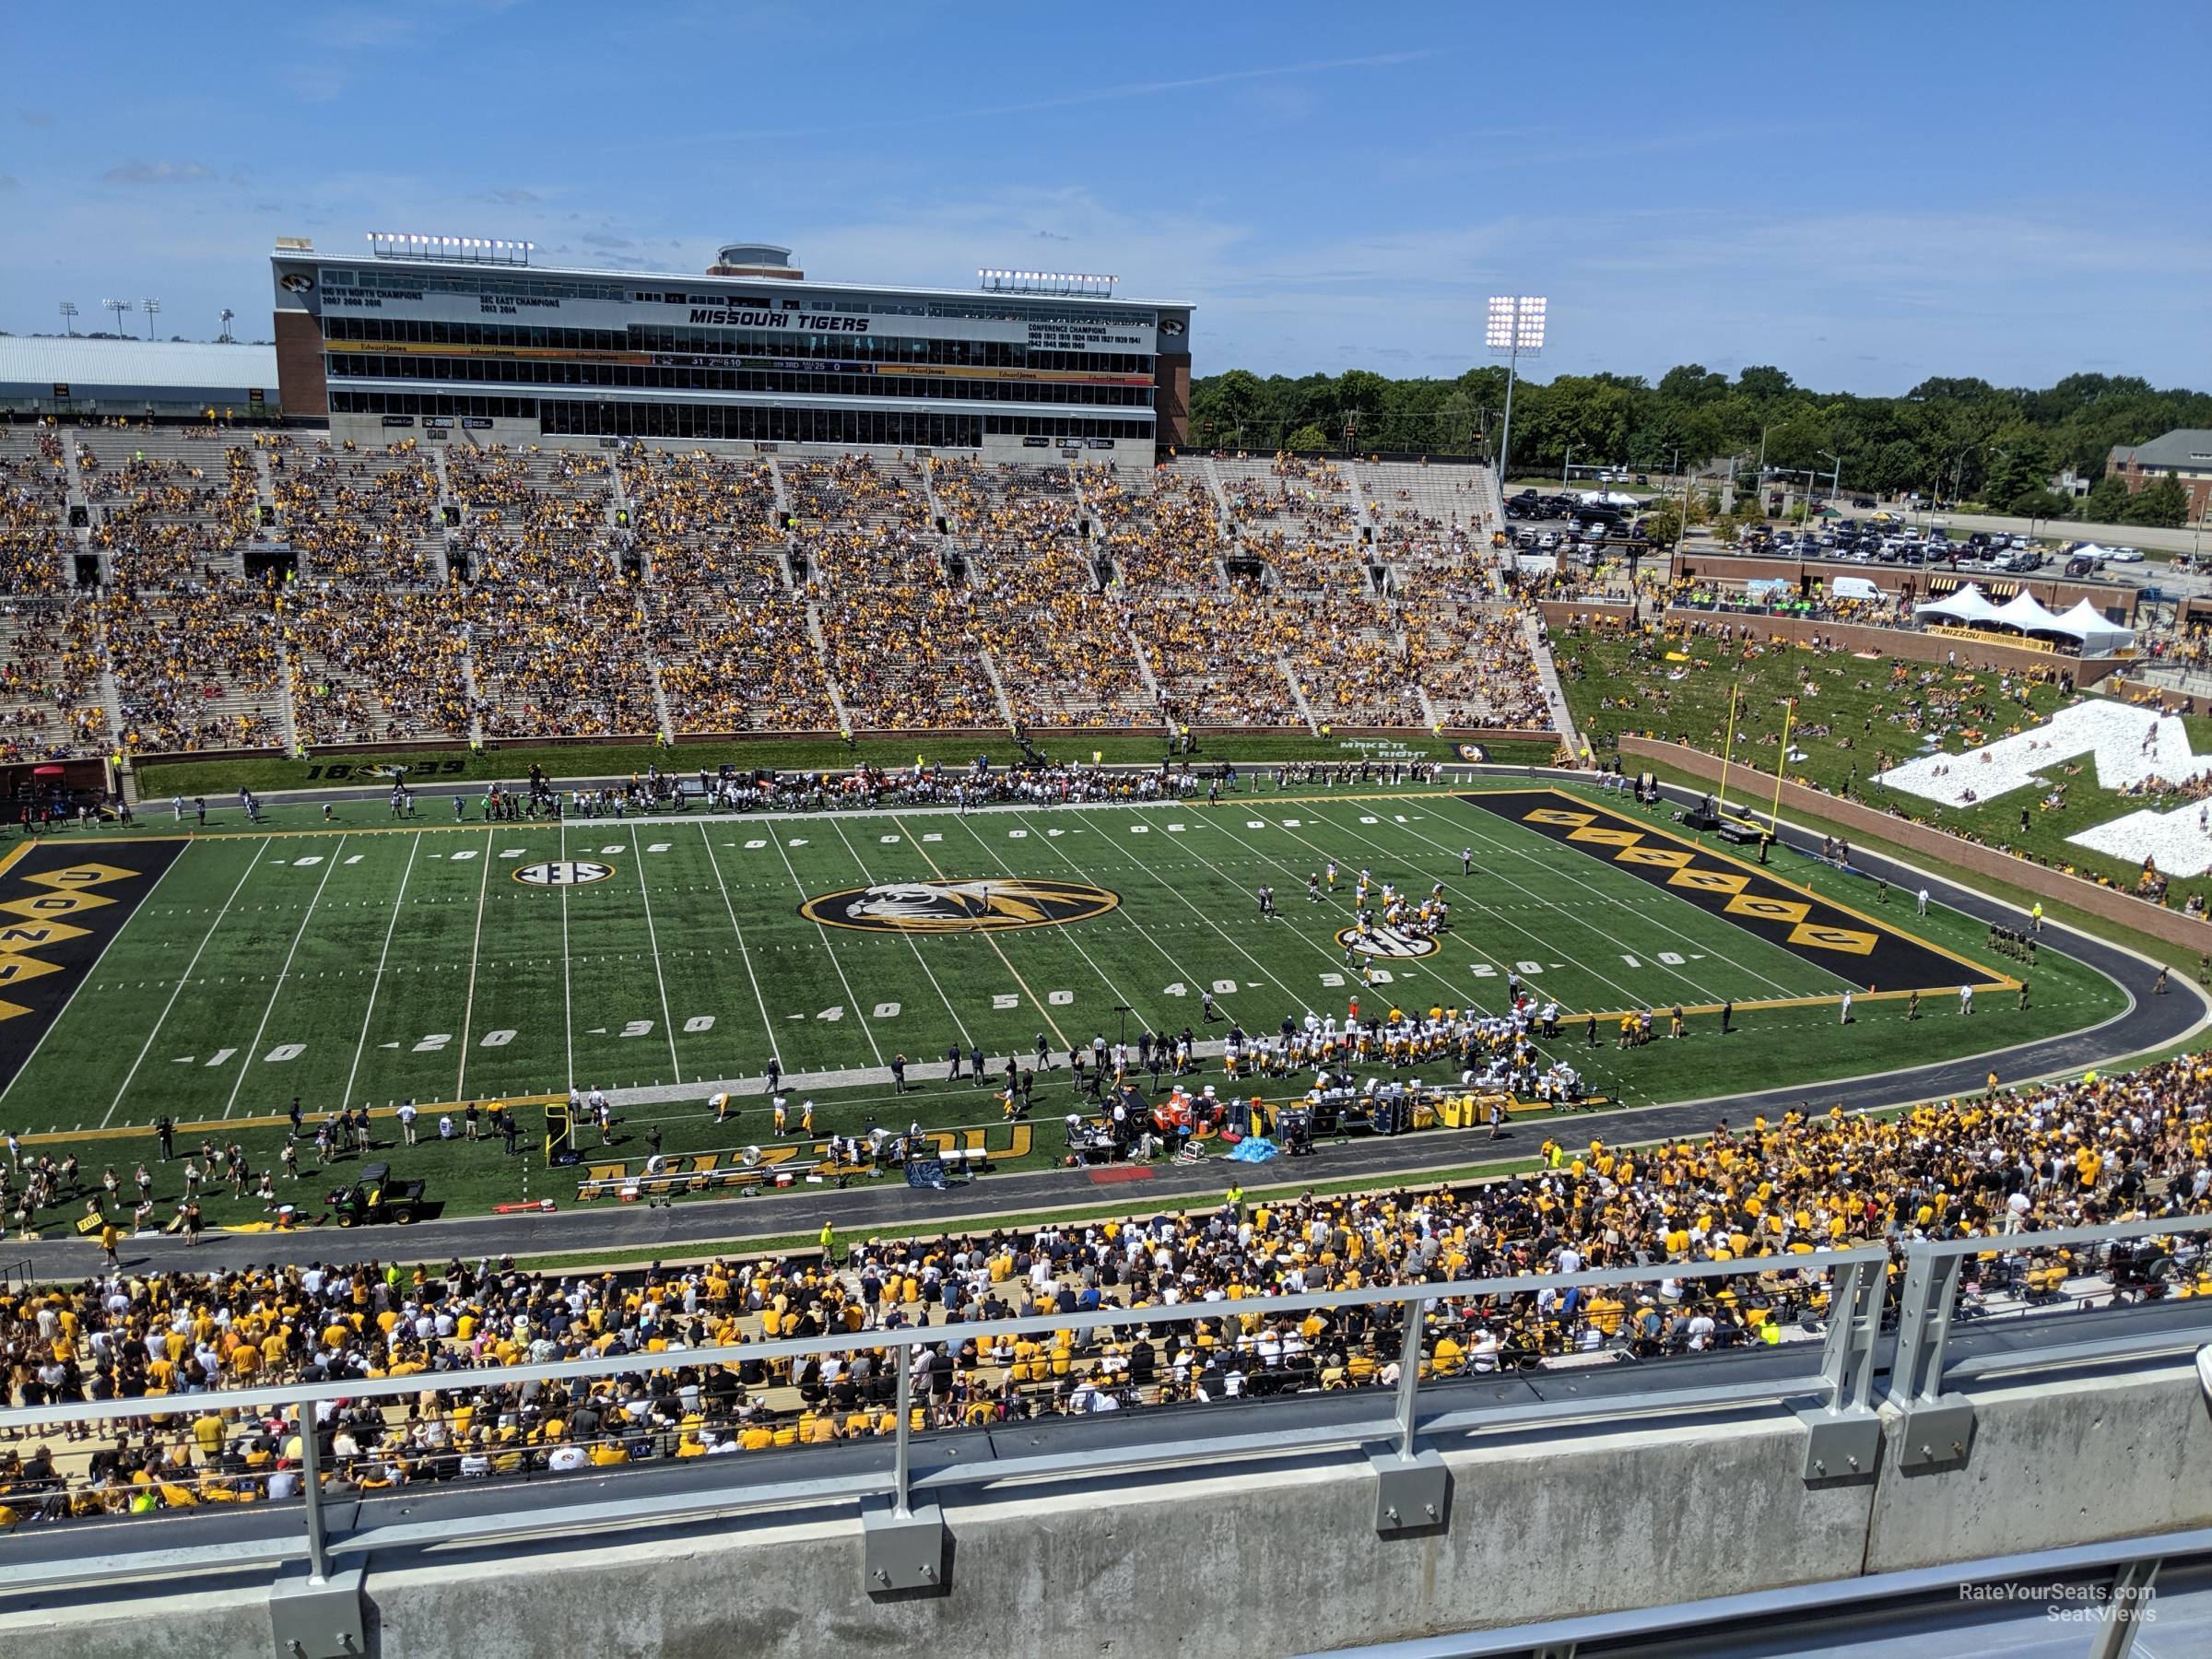 section 306, row 4 seat view  - faurot field